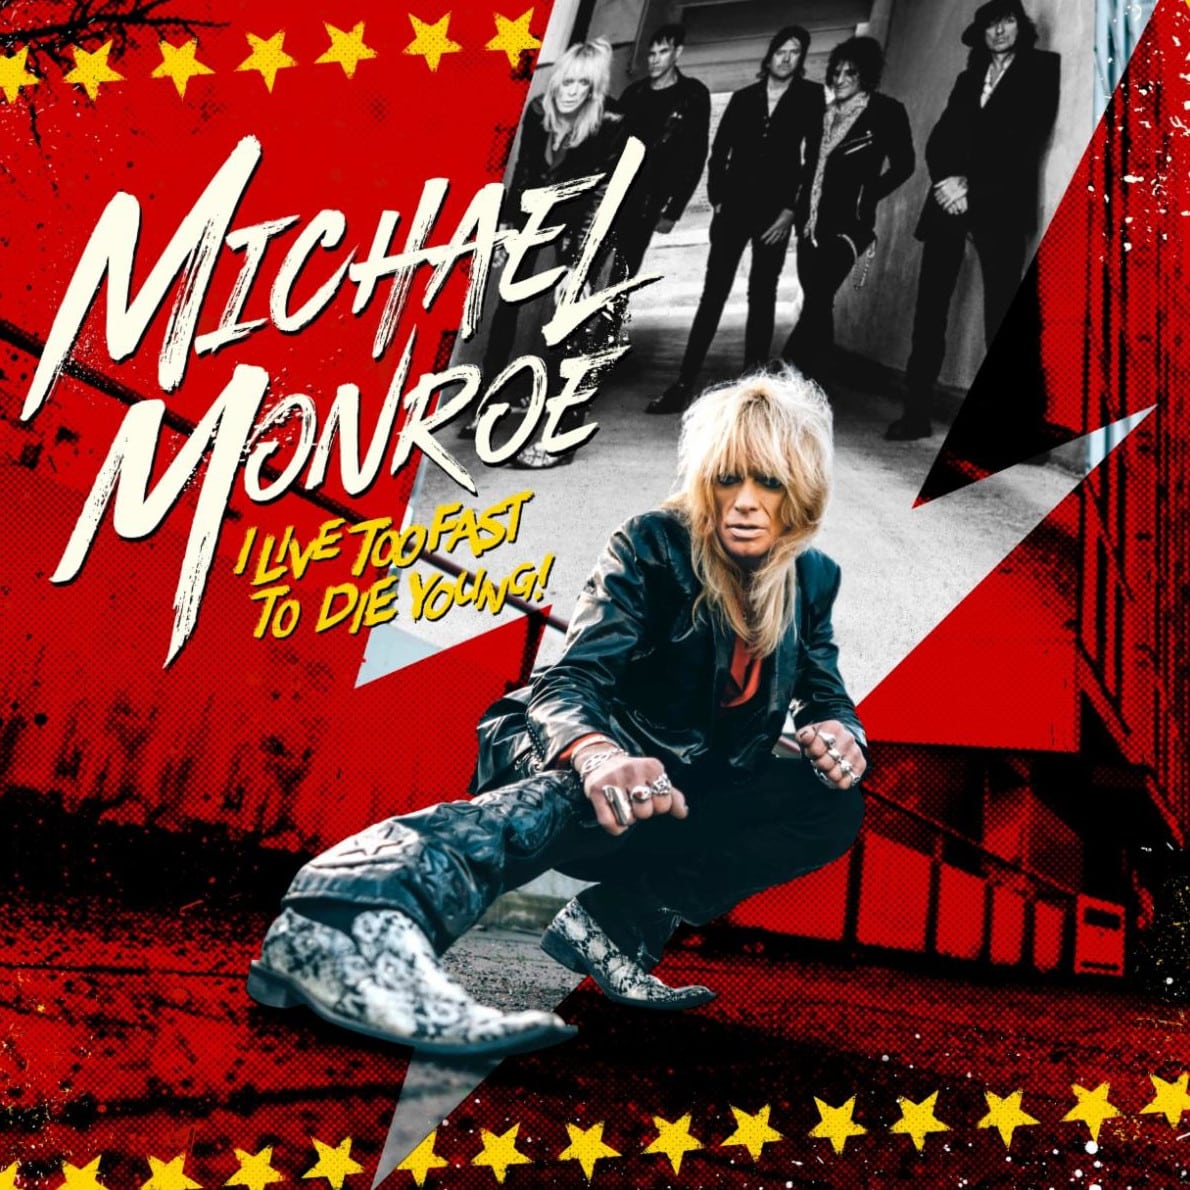 NY VIDEO: Michael Monroe - Can't Stop Falling Apart 1